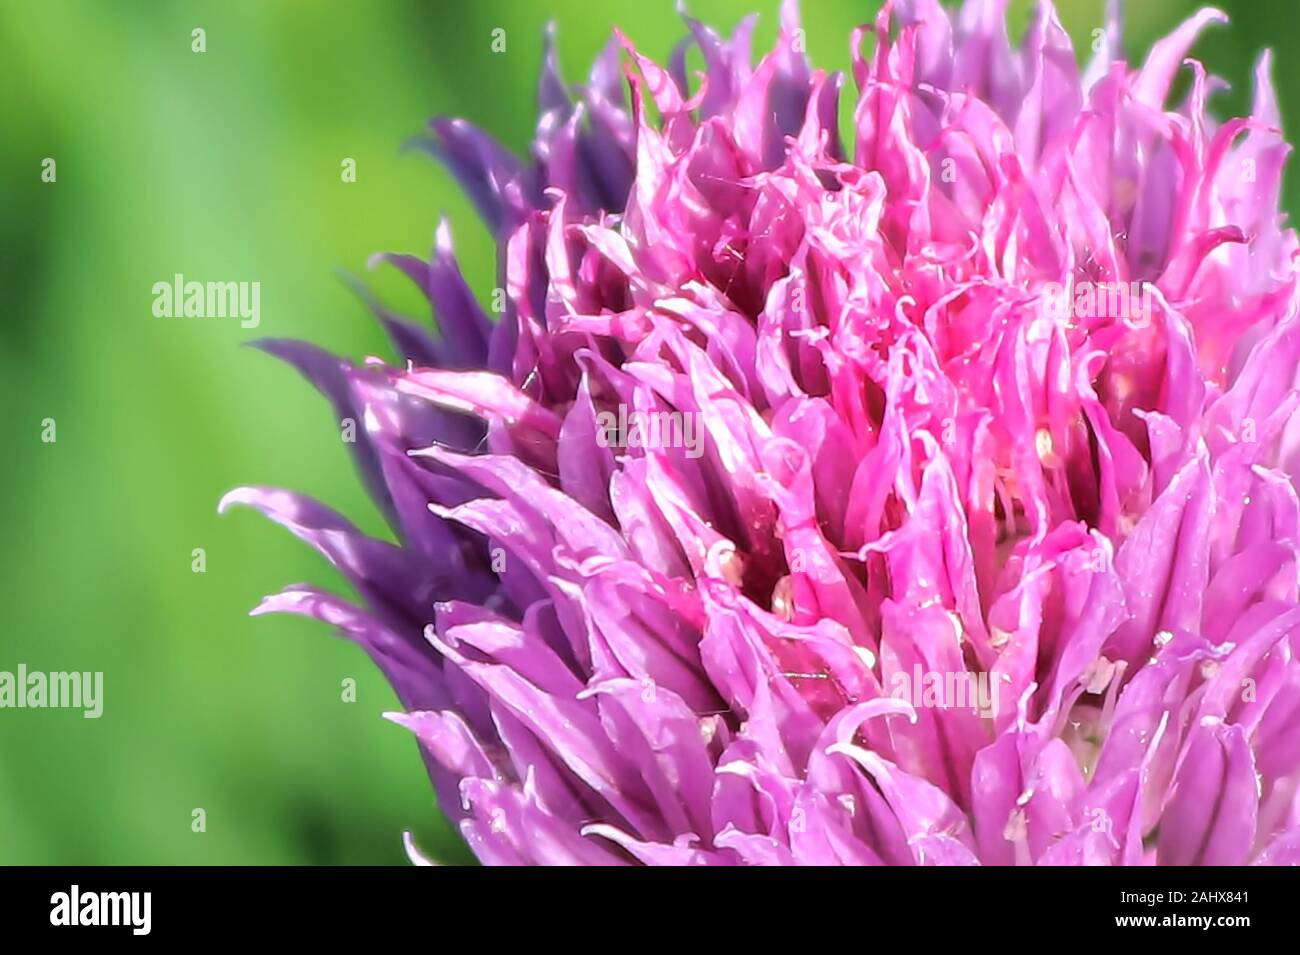 Macro view of delicate fresh pink garden chive blossoms Stock Photo